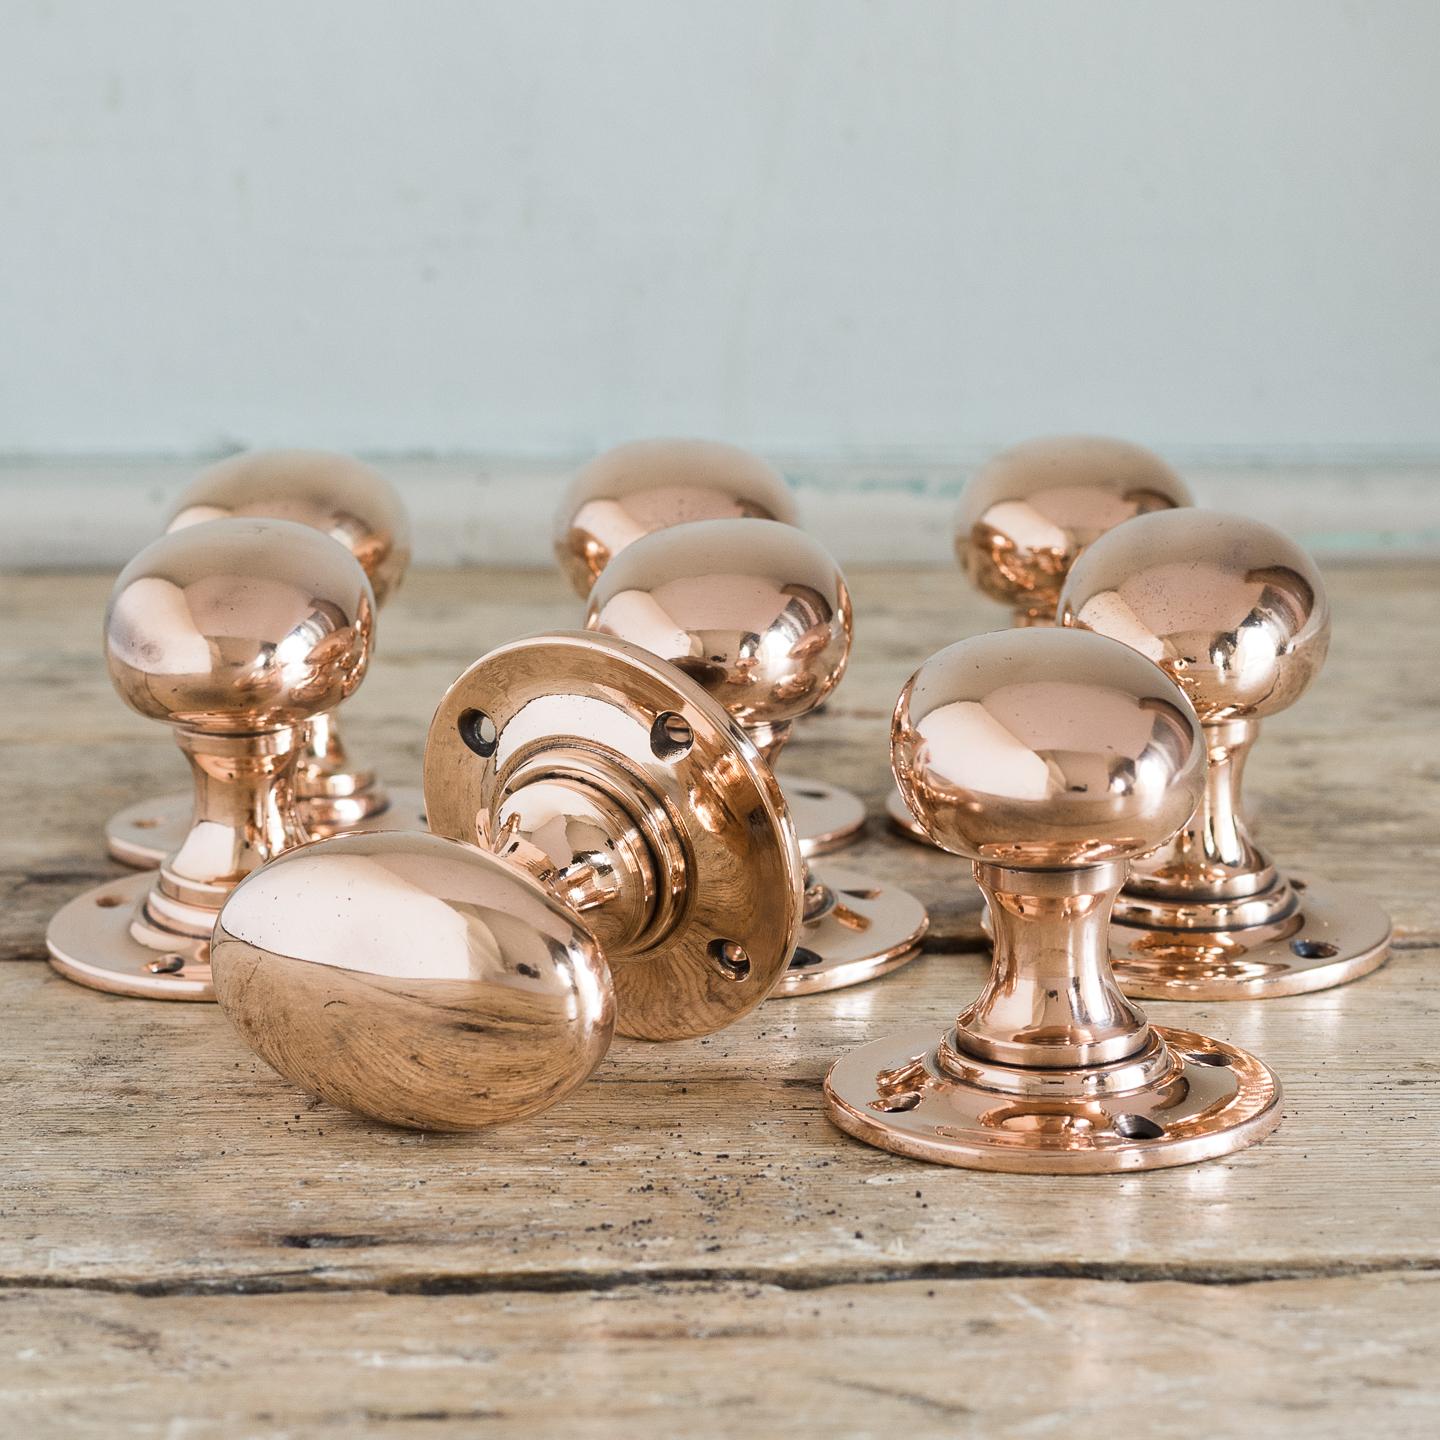 Large early 20th century oval rose brass door knobs, circa 1920. Four pairs available.